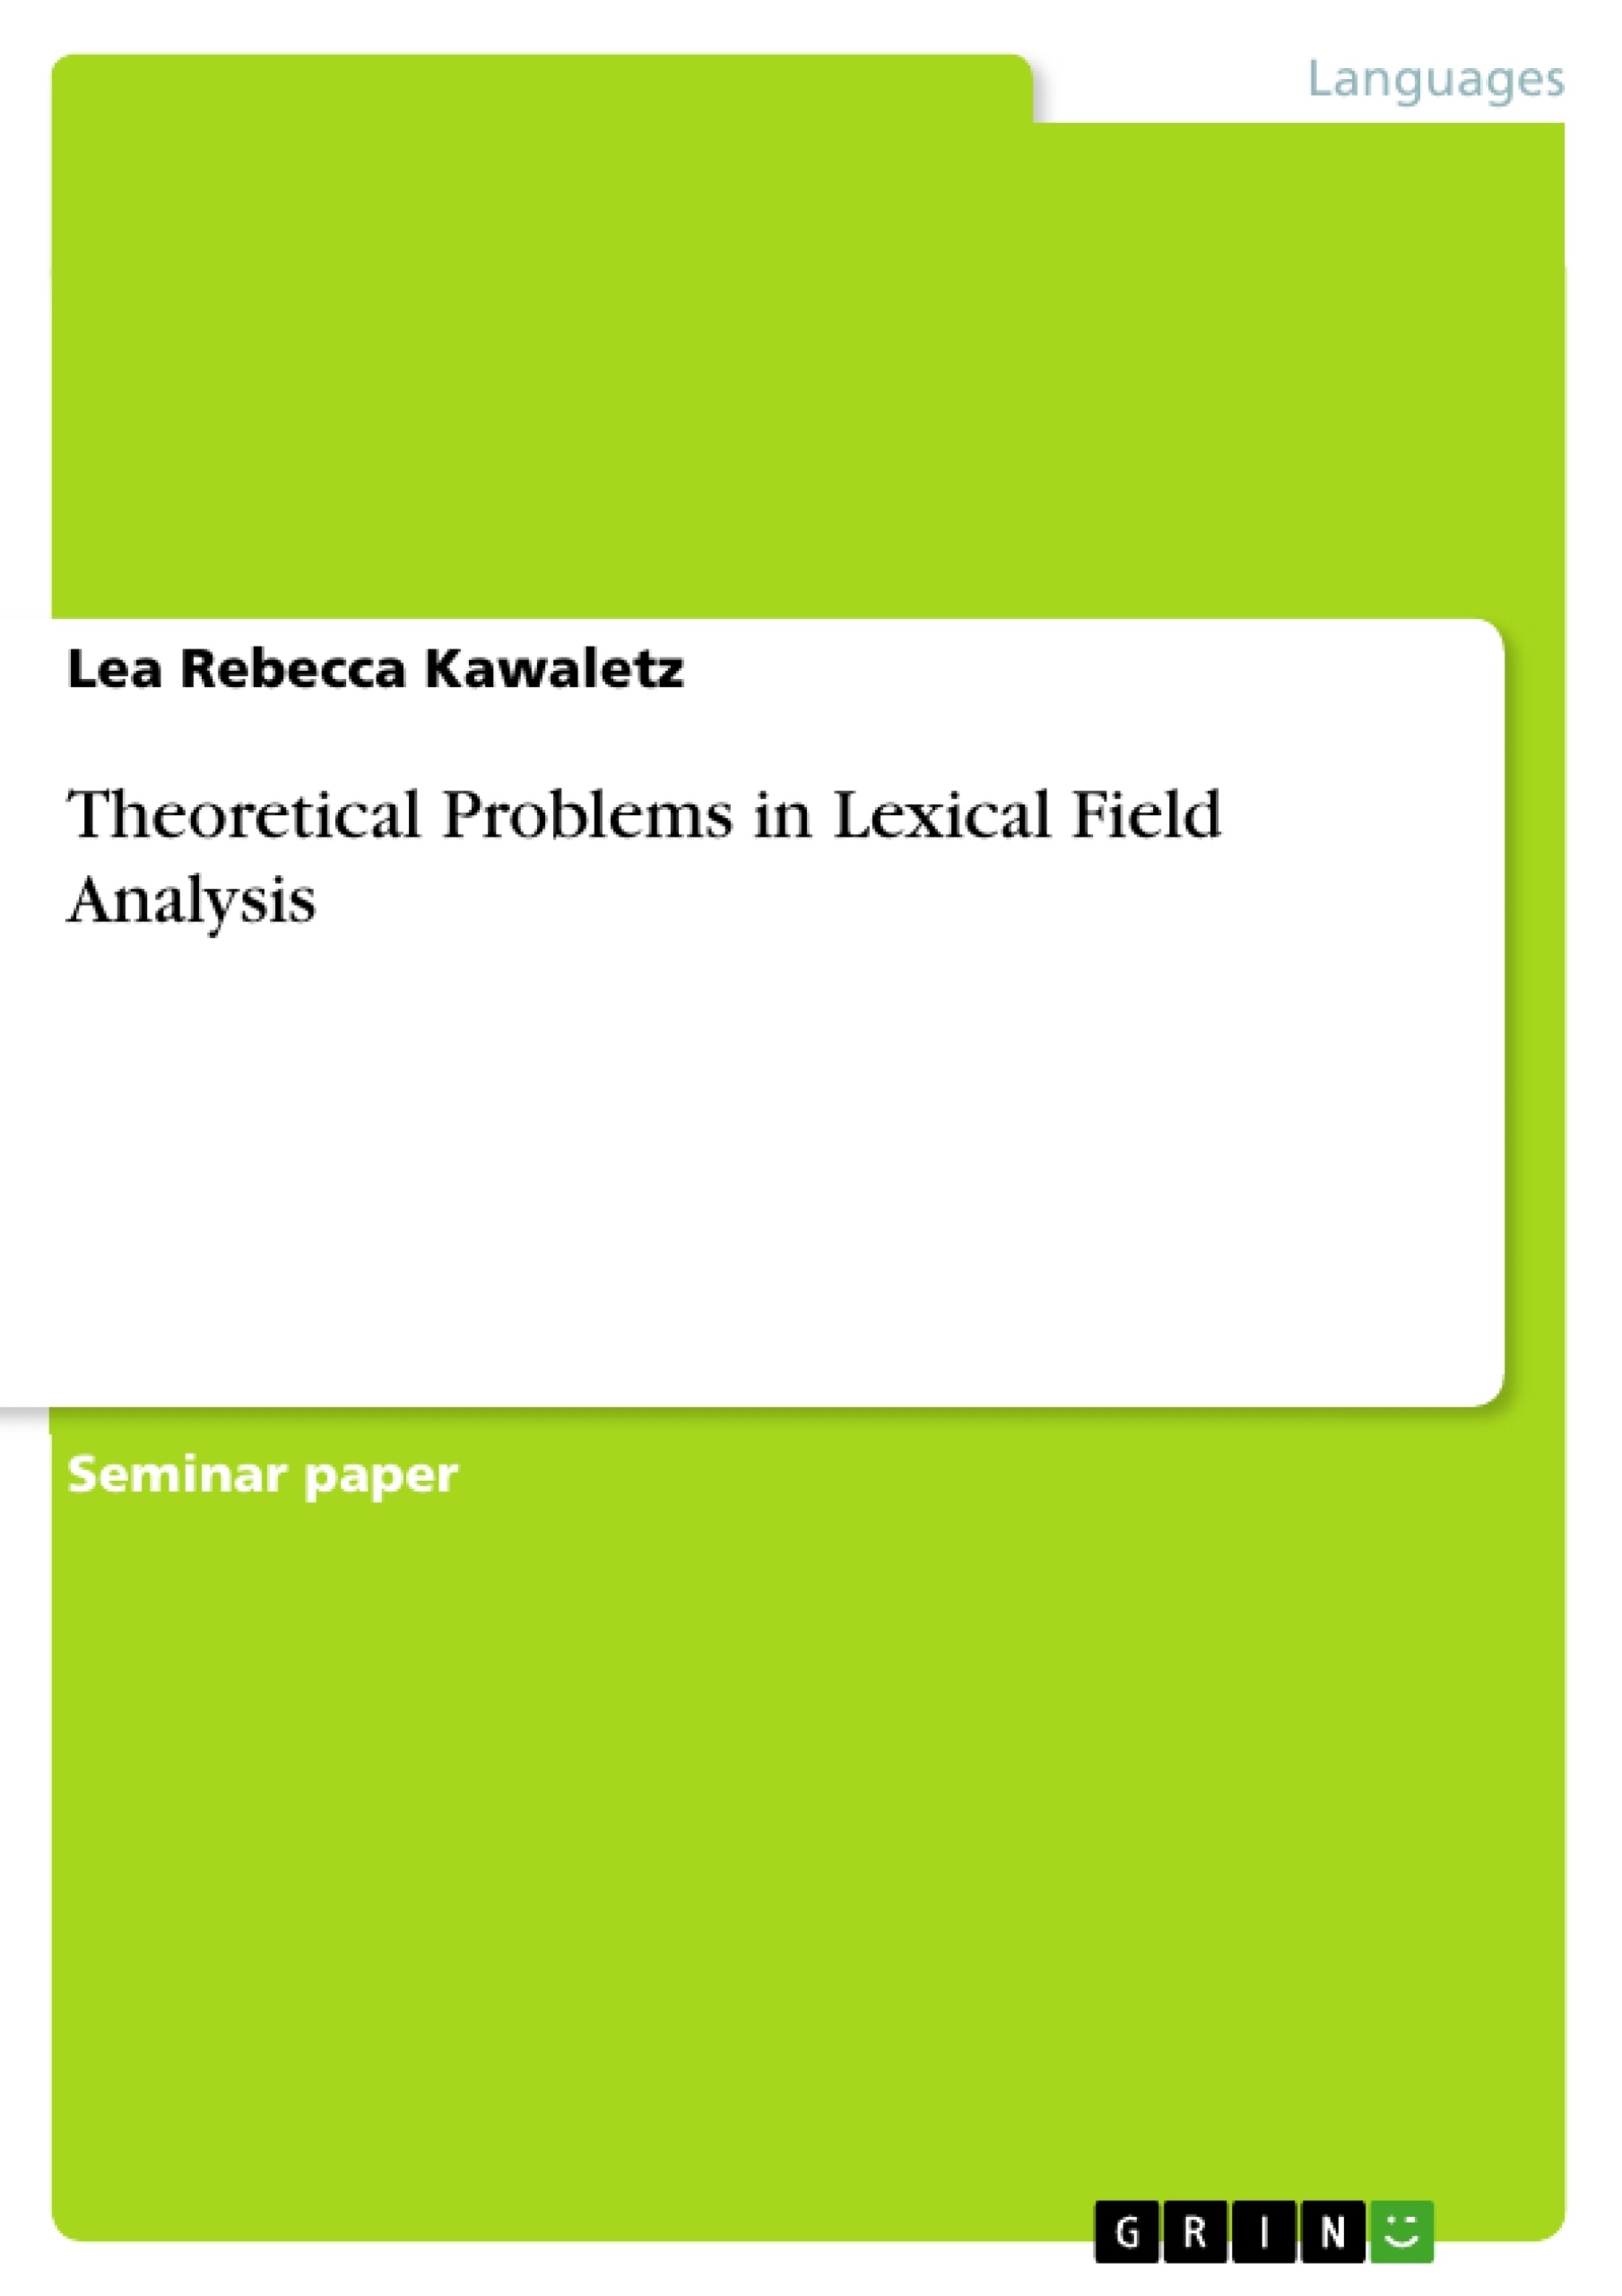 Título: Theoretical Problems in Lexical Field Analysis